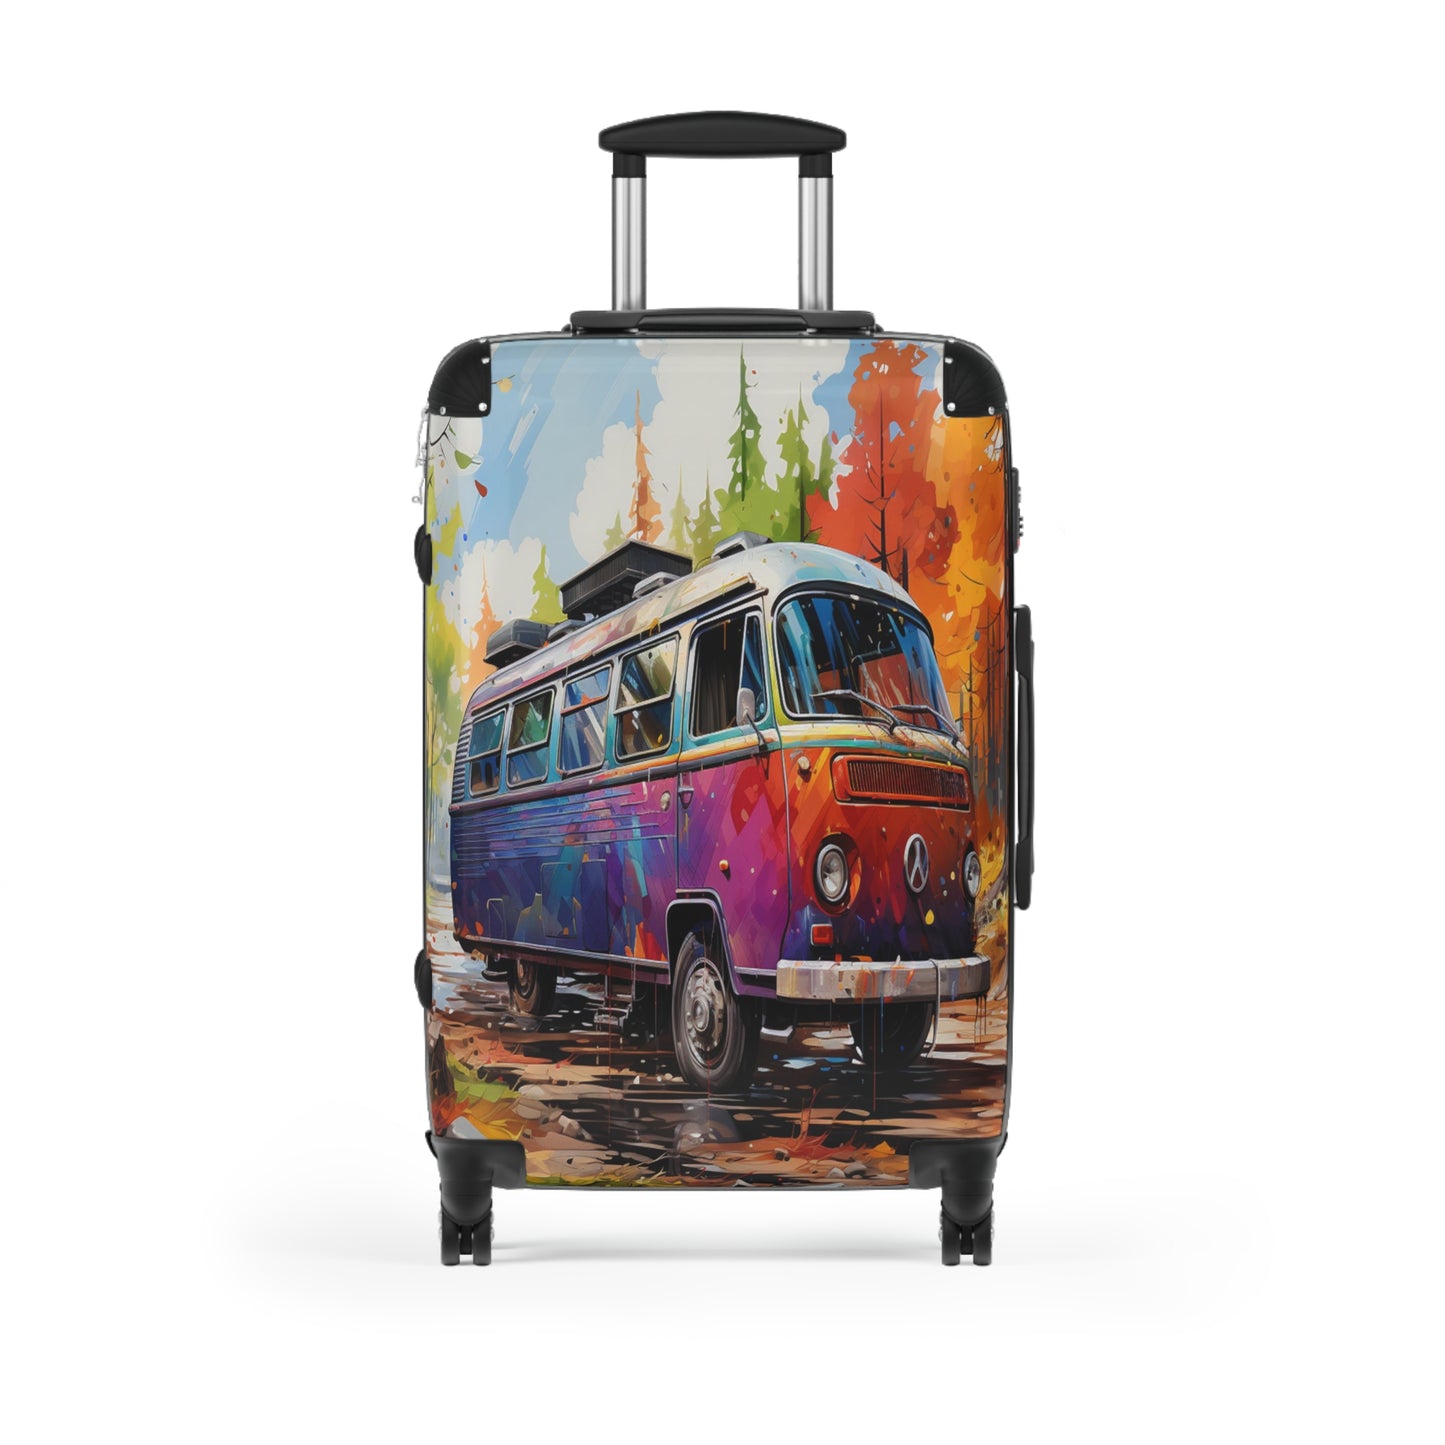 Bohemian Road Luggage | Hippie Trip Collection | Christmas vacation | Travel Luggage | Suitcase | Boho | Retro